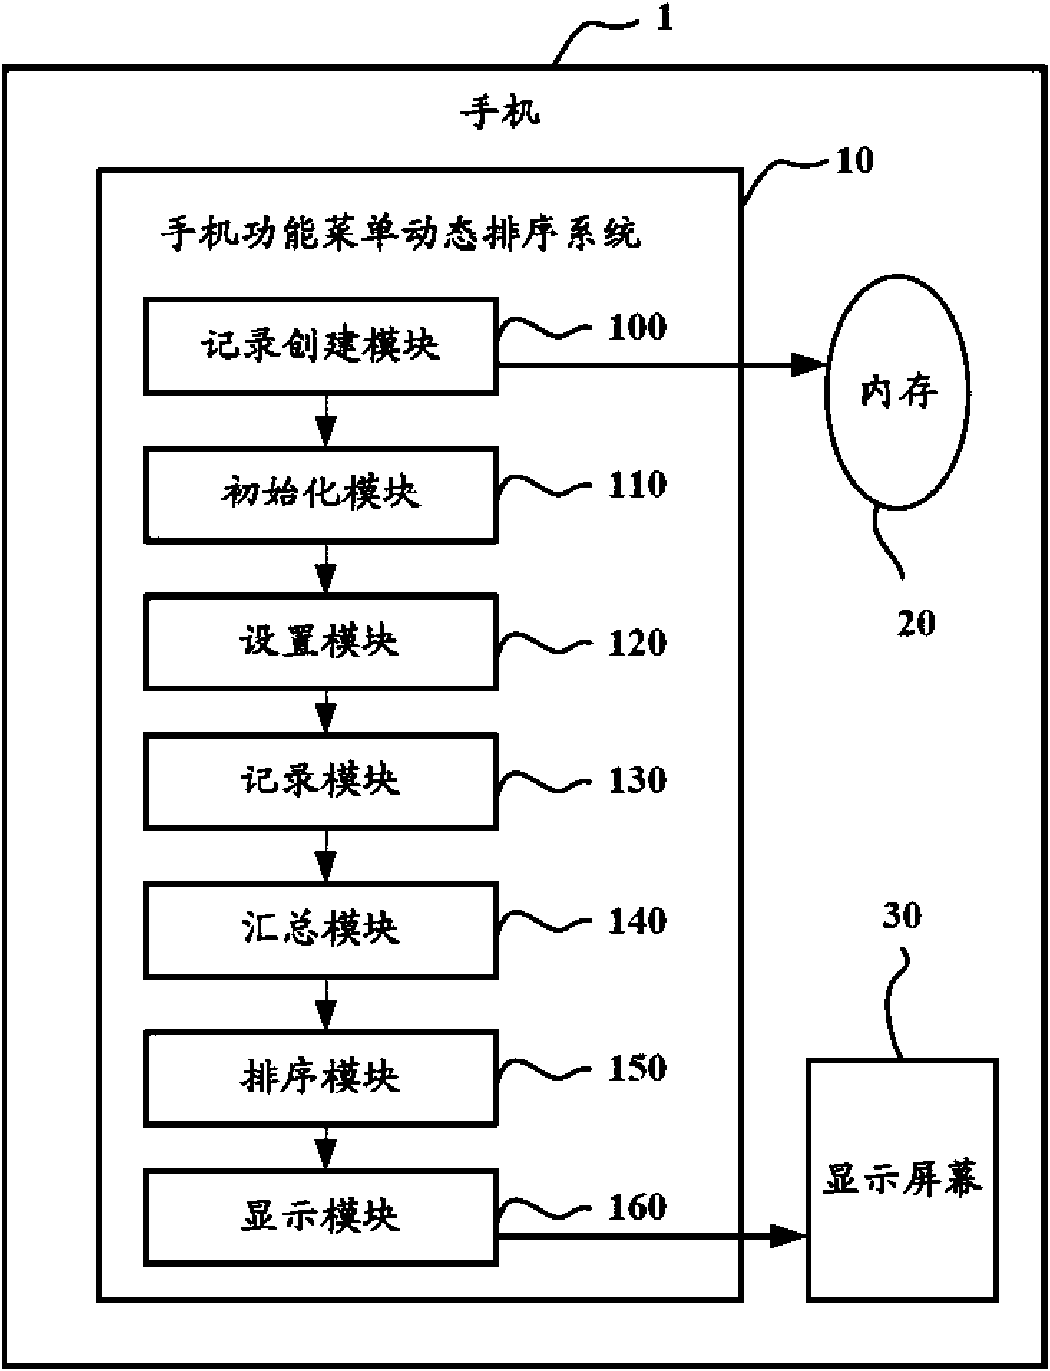 Mobile phone realizing function menu dynamic sequencing, system and method